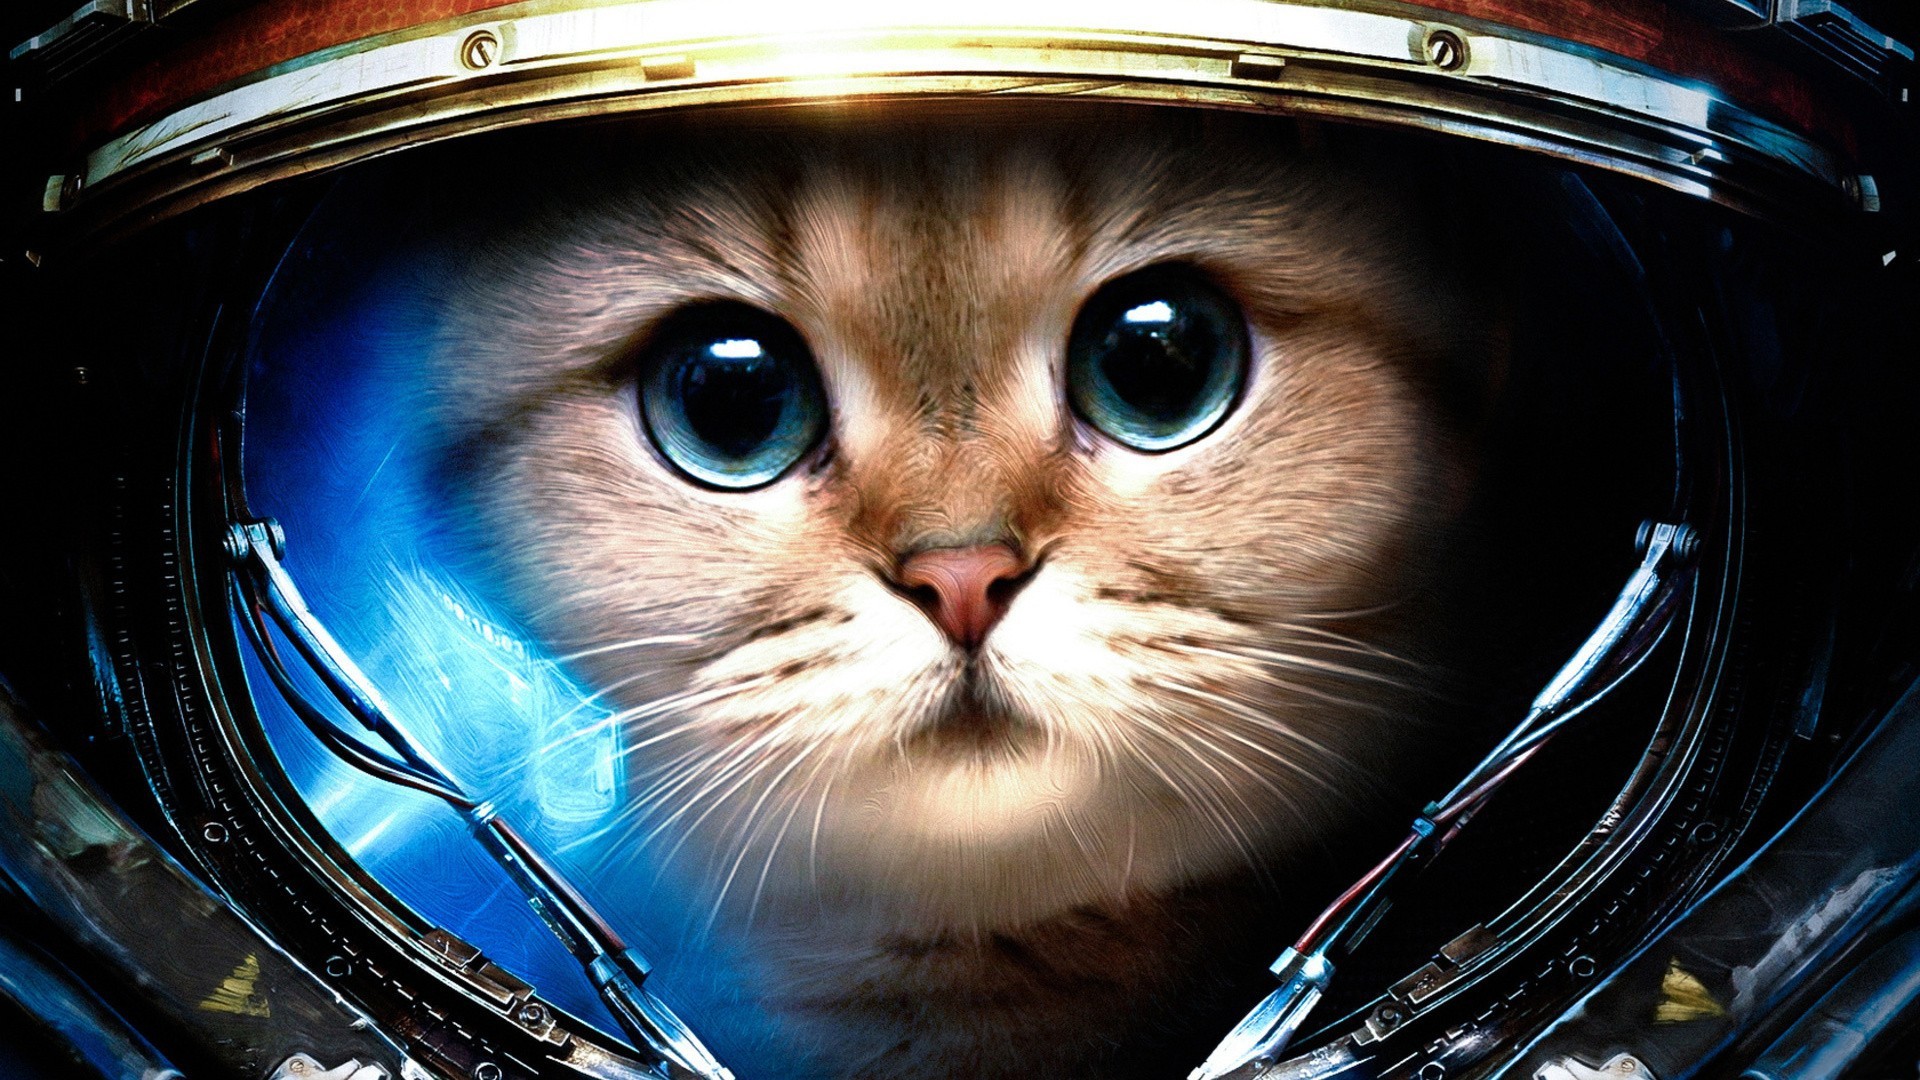 1920x1080 Cat astronaut wallpapers and images - wallpapers, pictures, photos